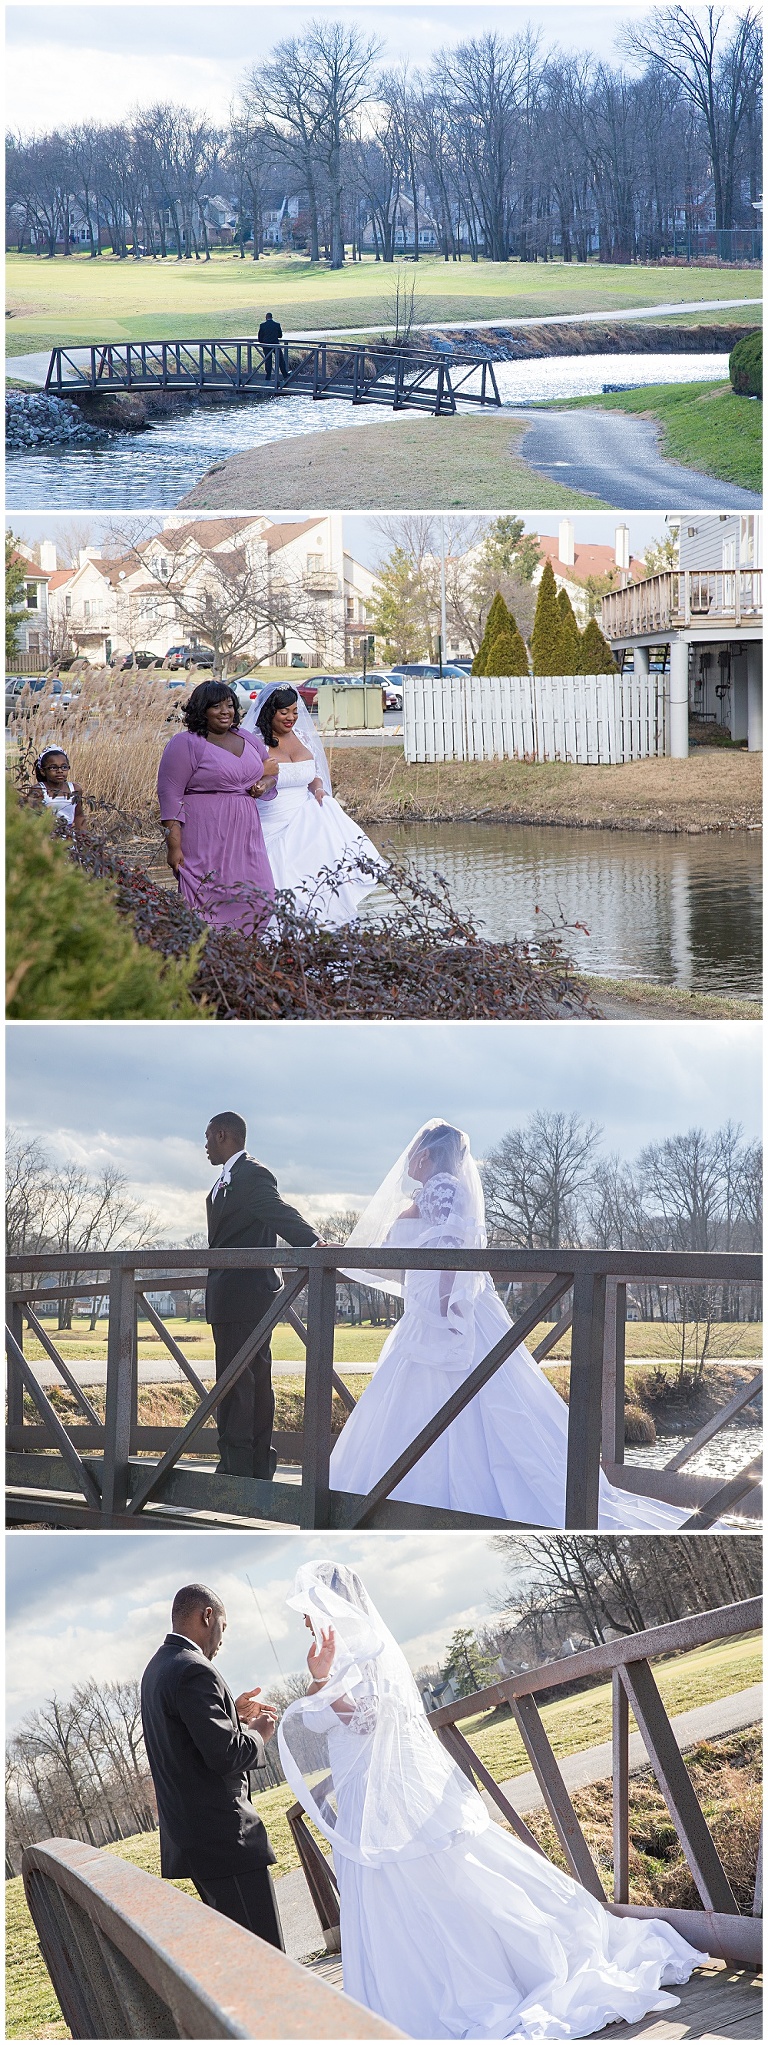 Alisa & Chris' New Years Eve Wedding! | Patuxent Greens Country Club, Laurel Maryland 2013-12-31_0005